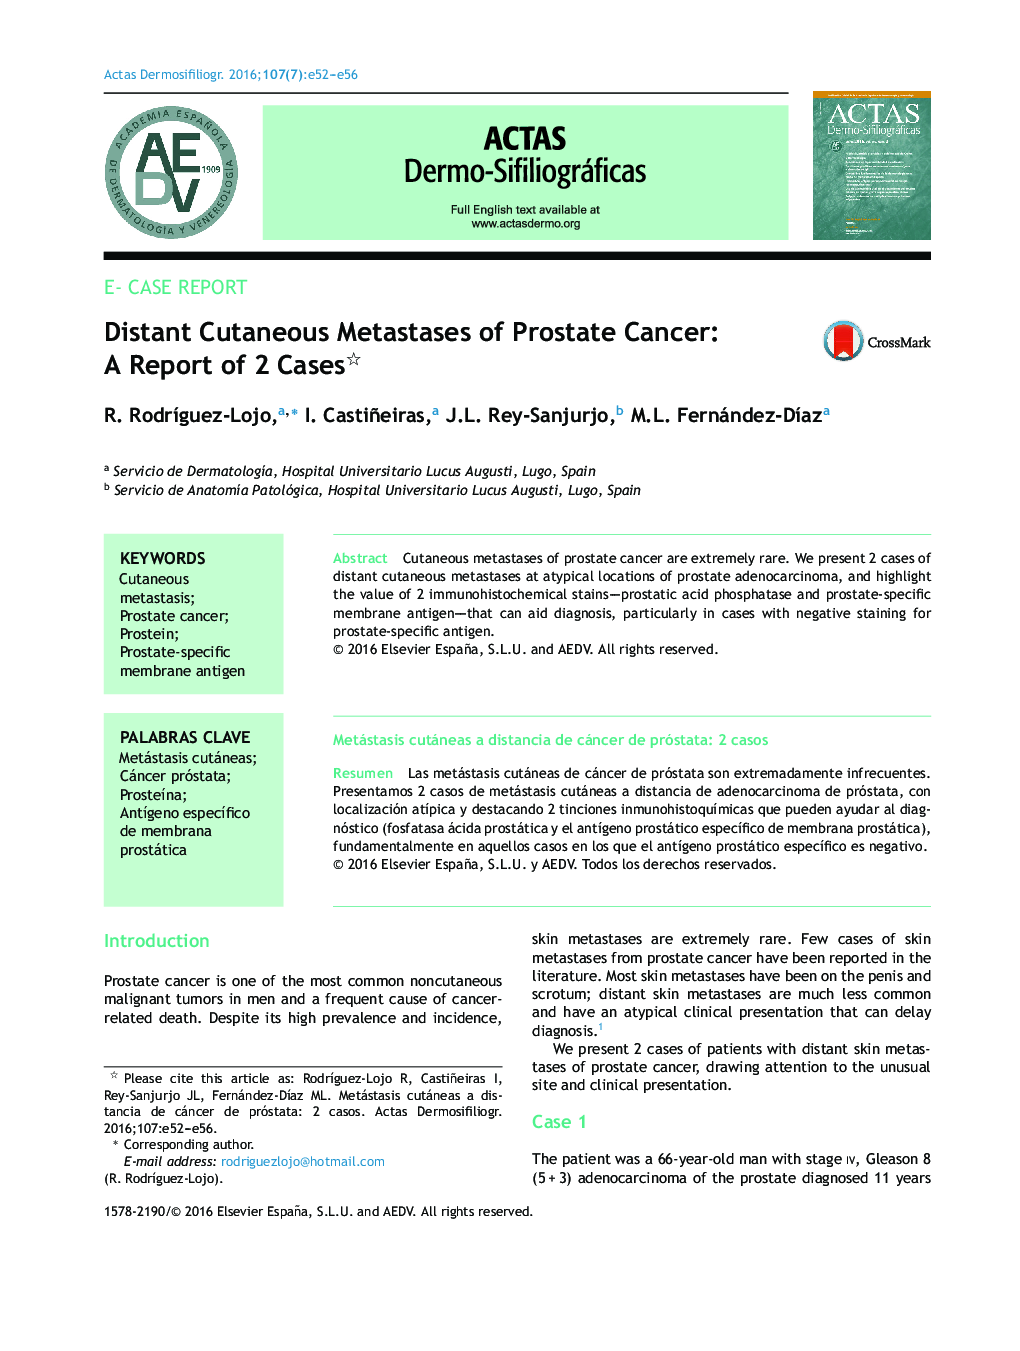 Distant Cutaneous Metastases of Prostate Cancer: A Report of 2 Cases 